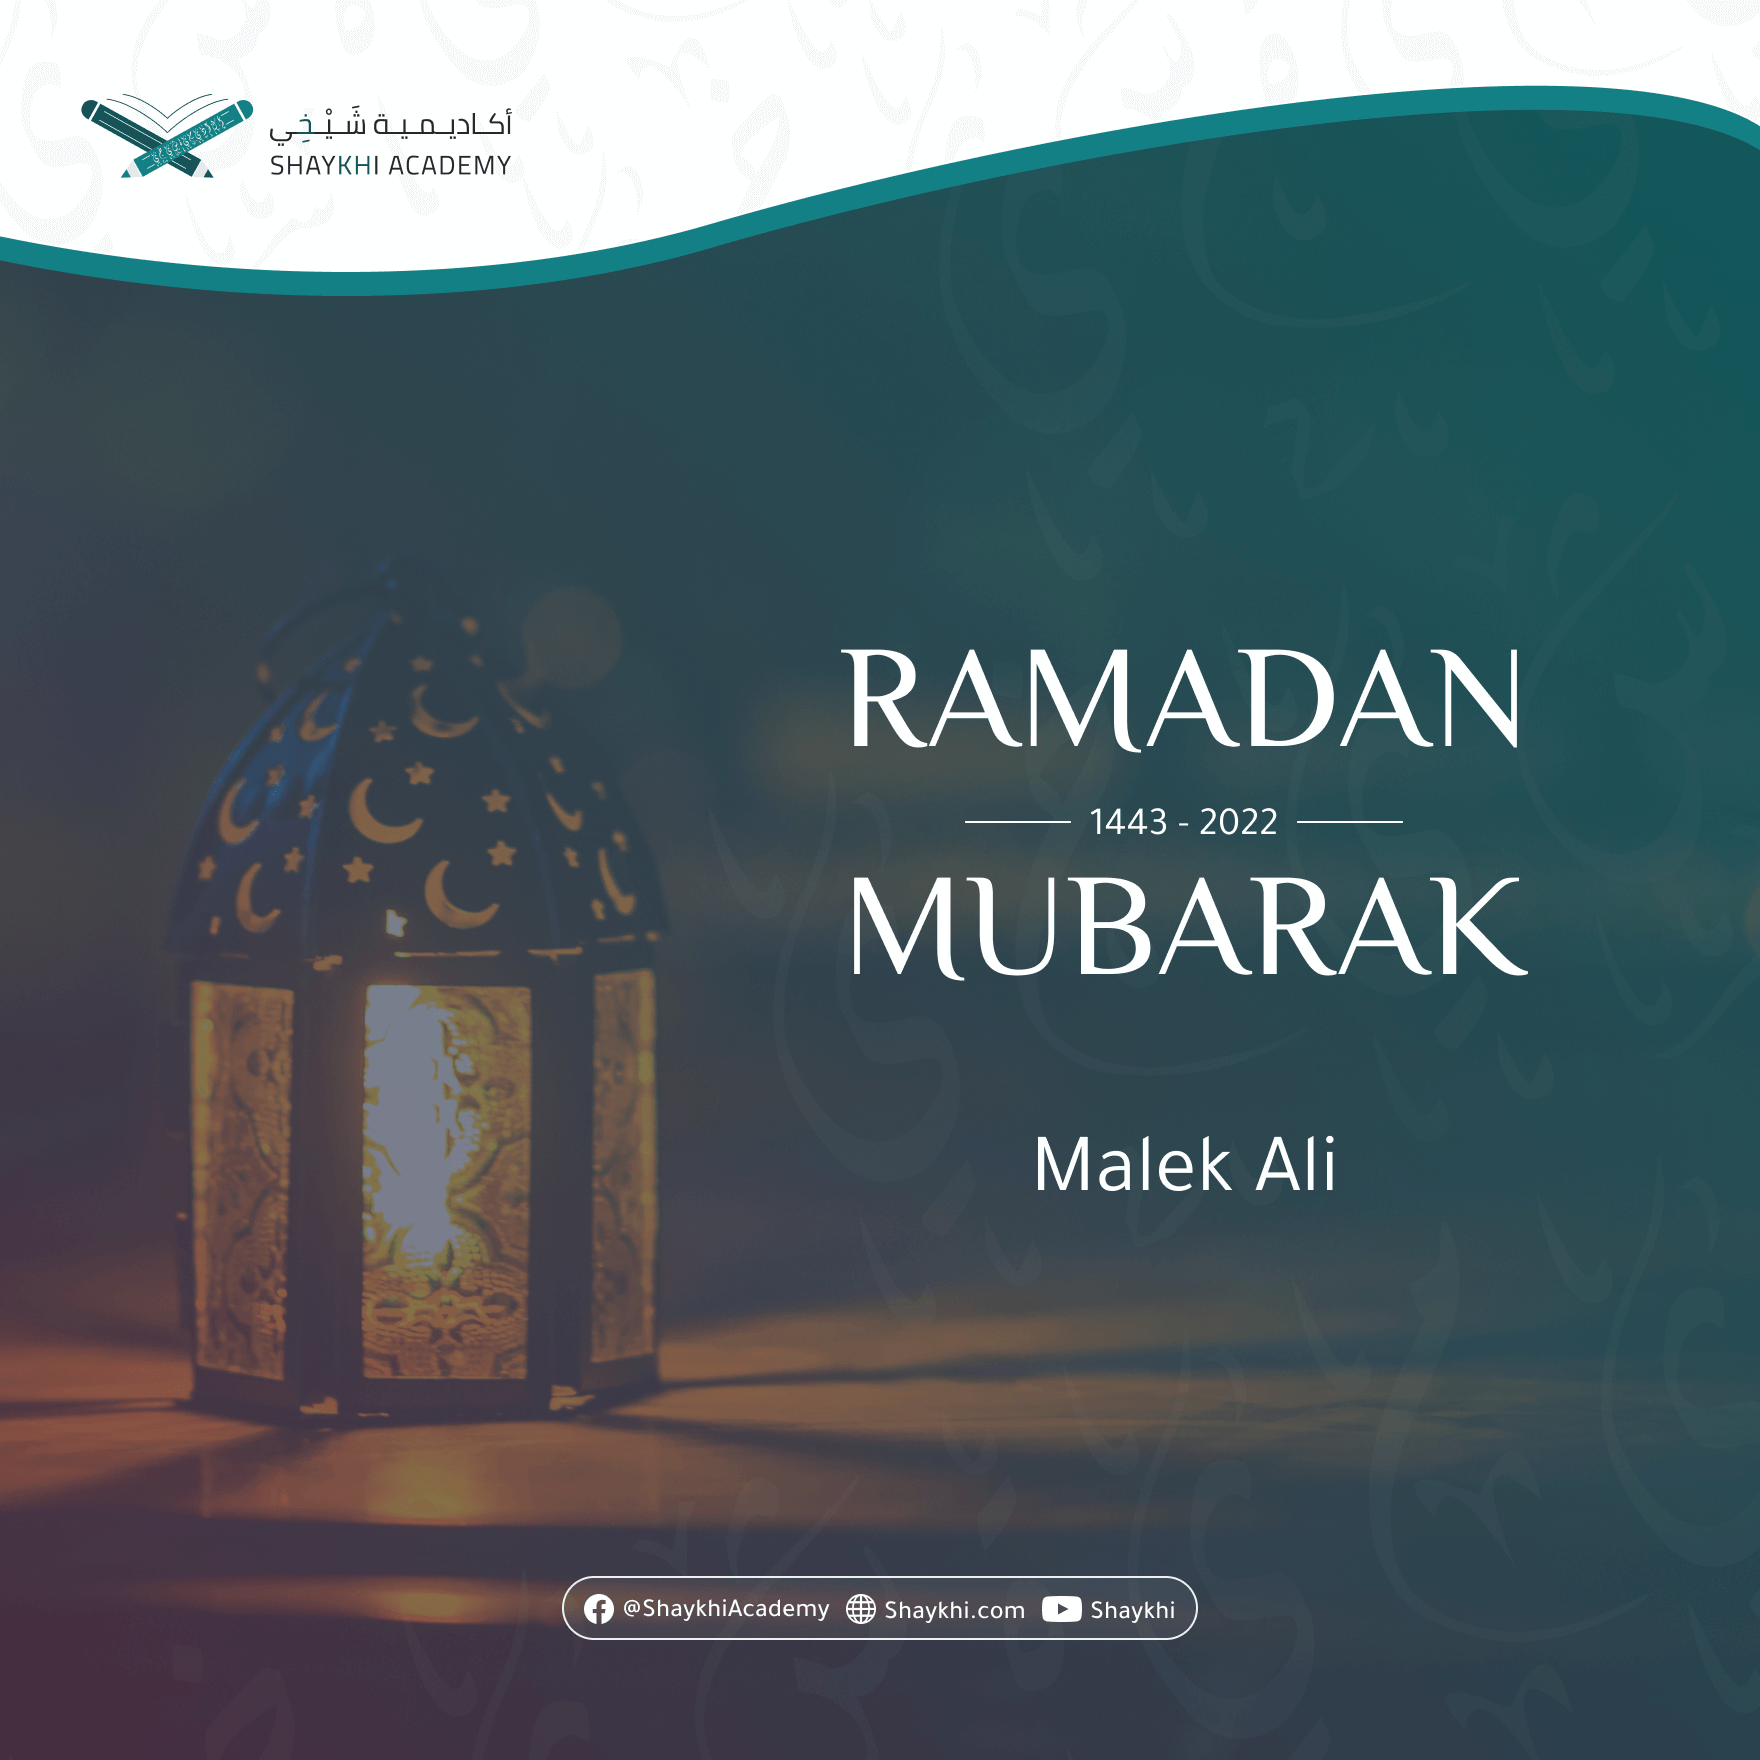 Ramadan Mubarak Images and Meaning - cards for Quran Students 9 Adults